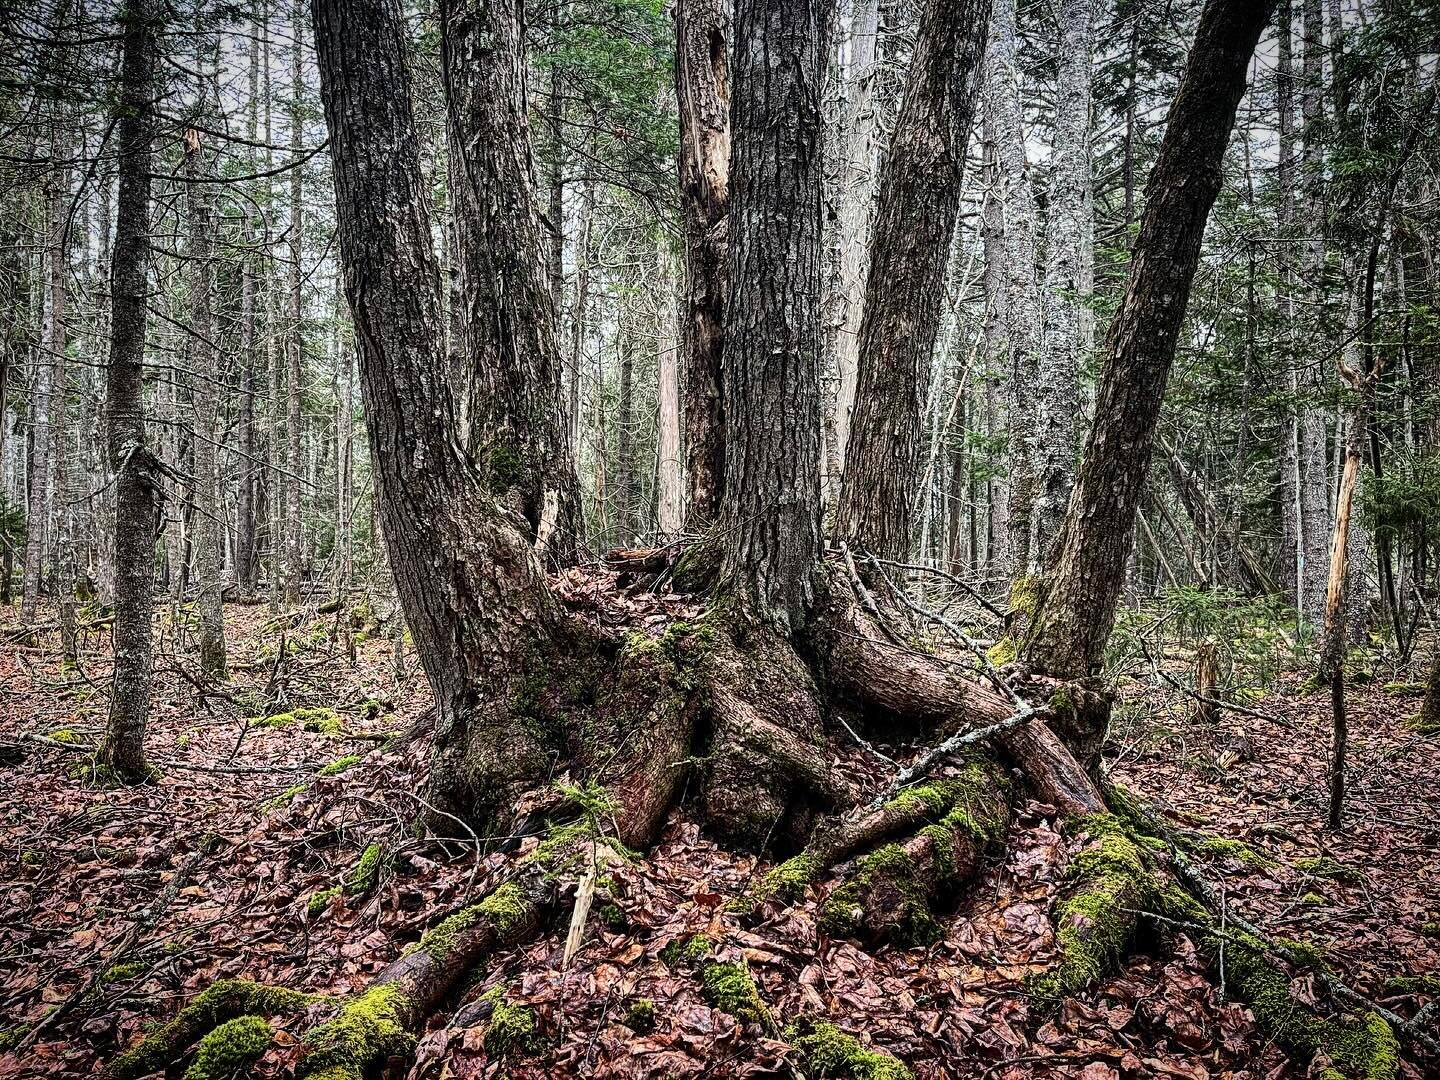 Old coppiced giant on the Hutchins Marsh trail. 

#conservation #trail #hike #walk #naturepreserve #islesboro #penobscotbay #maine #tree #trees